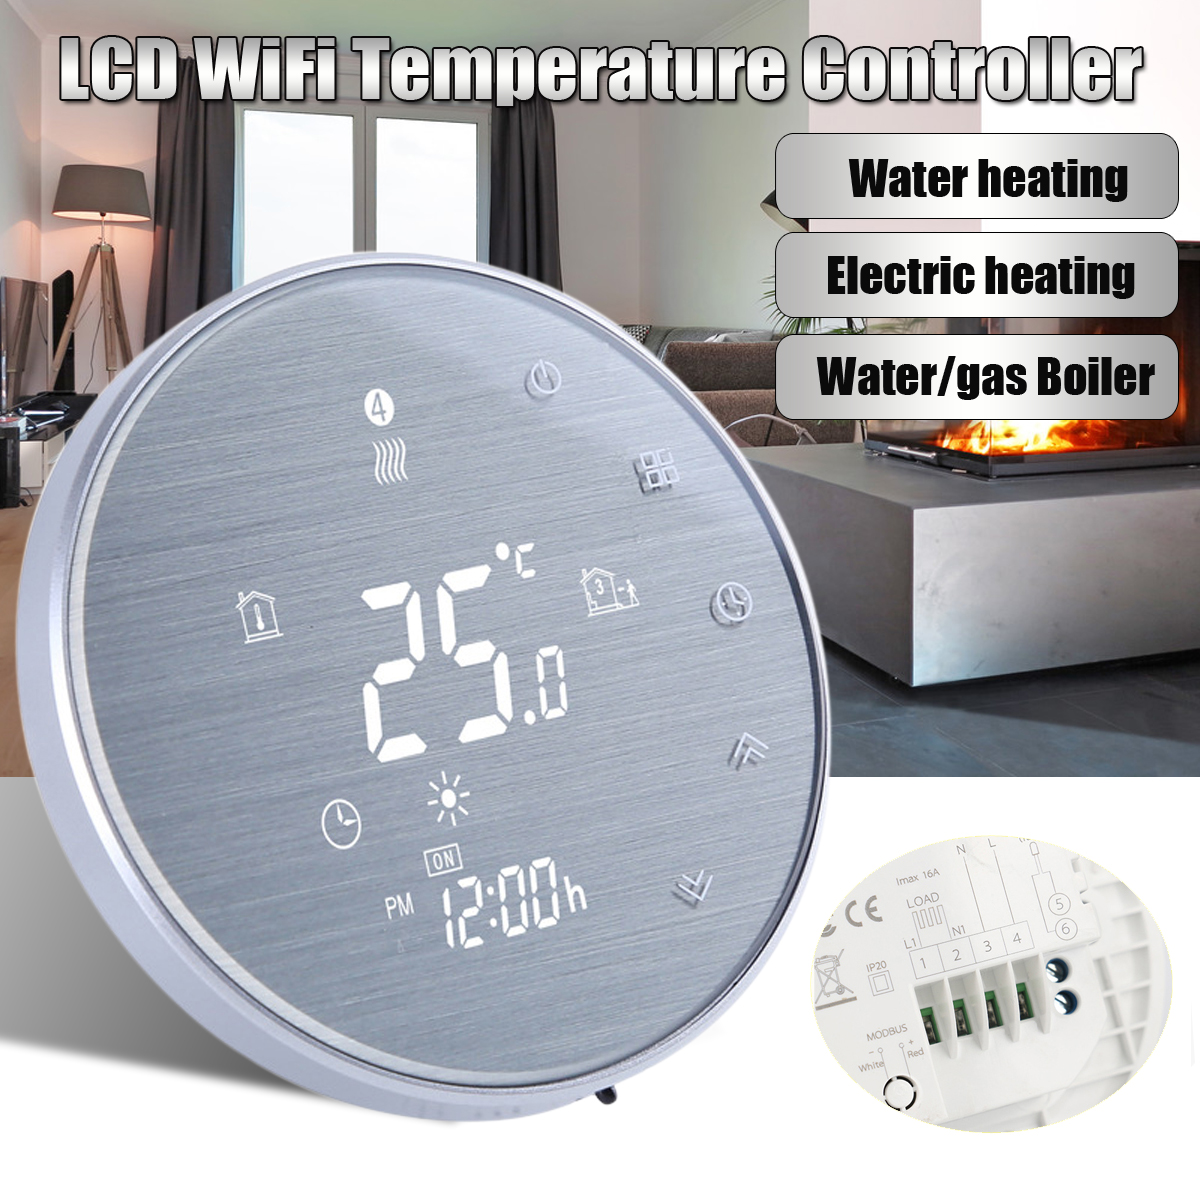 WiFi-Temperature-Controller-LCD-Display-Water-Floor-Heating-Fireplace-Temperature-Control-1670789-2